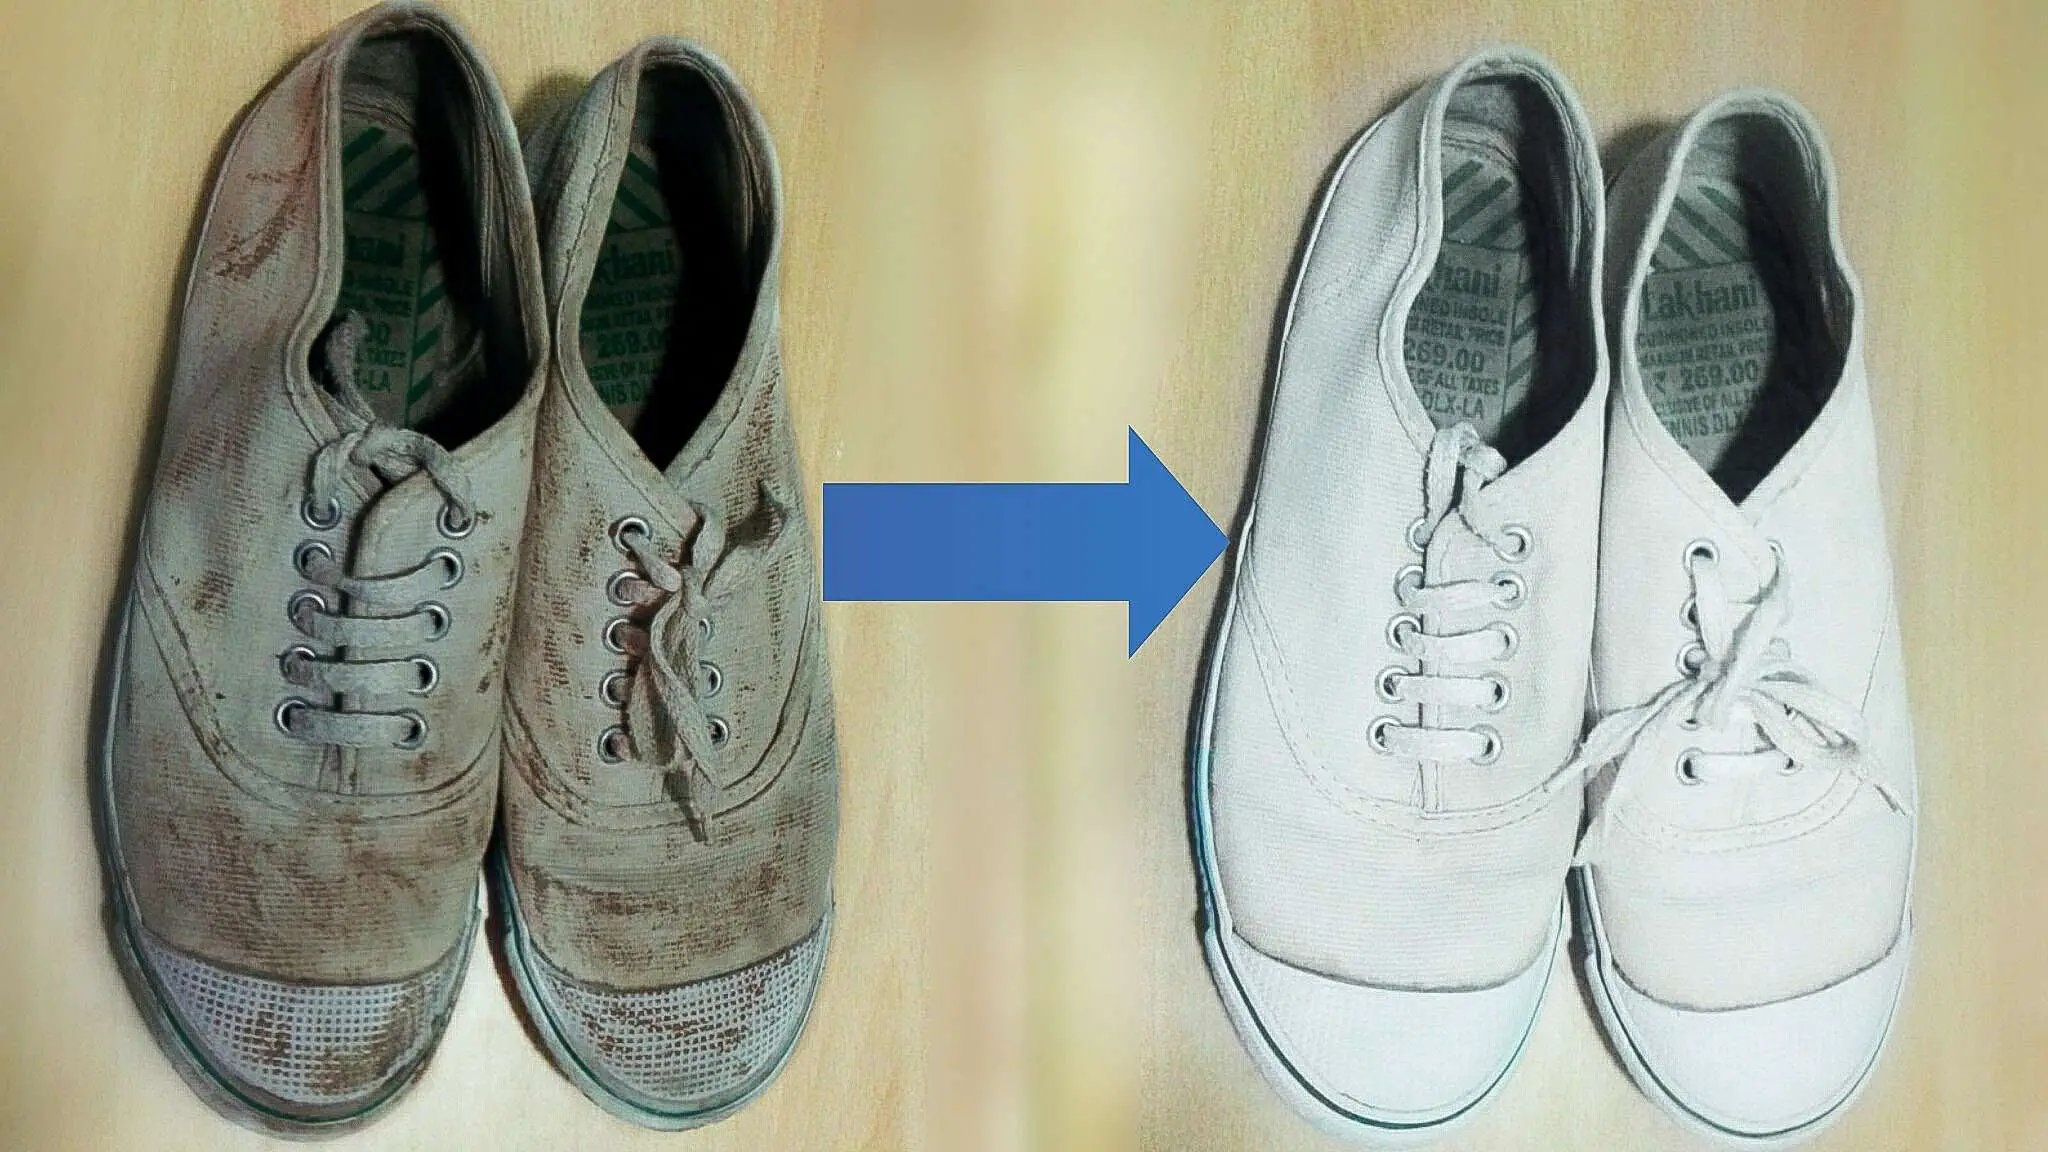 HOW TO CLEAN WHITE FABRIC SHOES